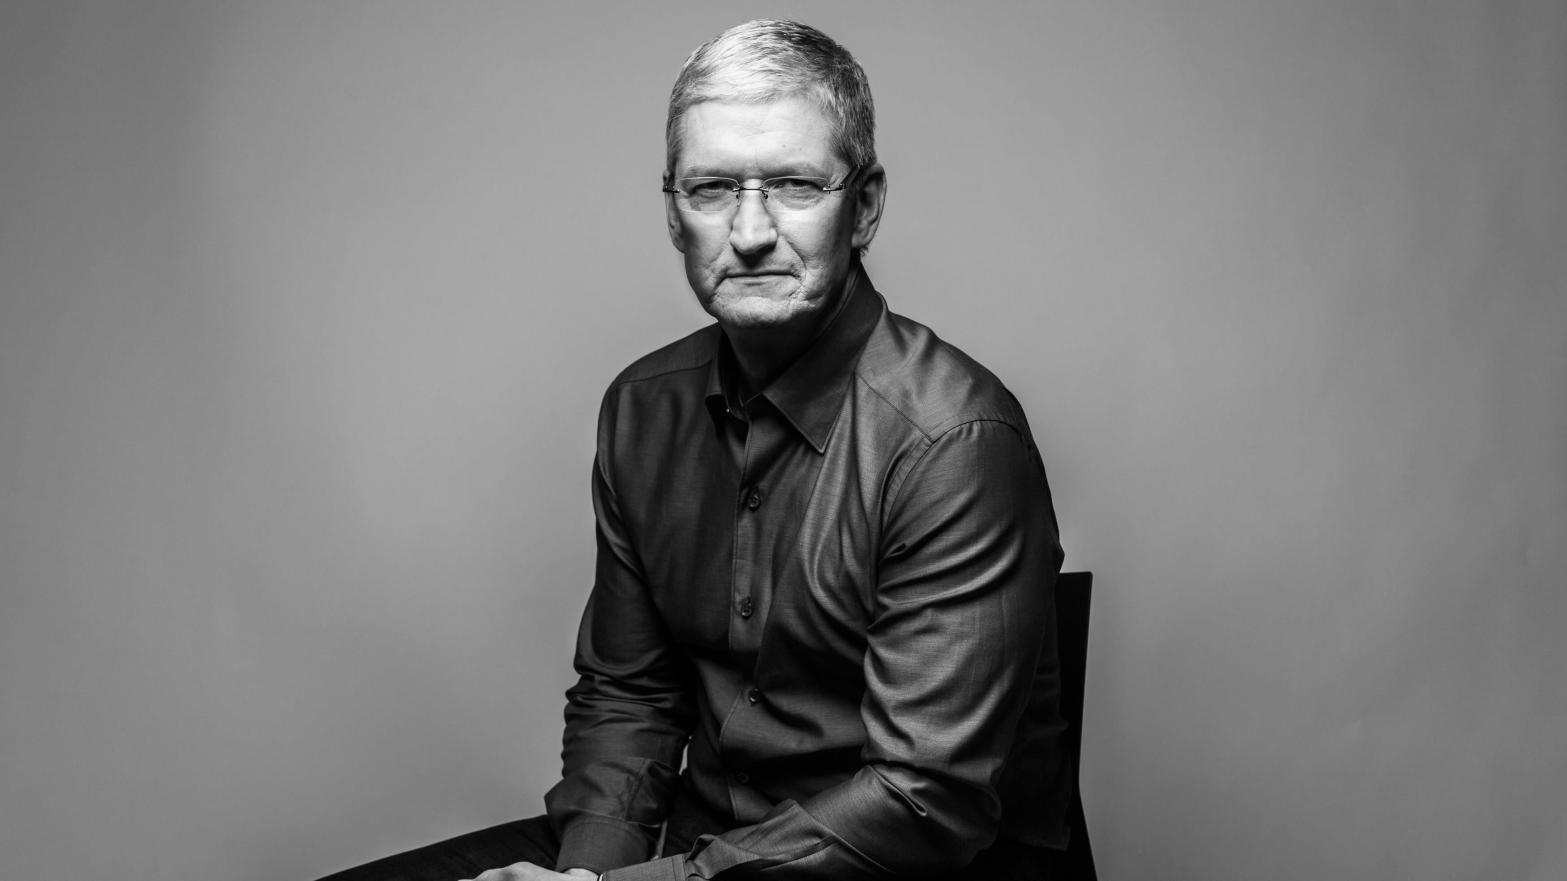 Apple CEO Tim Cook poses for a portrait at Apple's global headquarters in Cupertino, California on July 28, 2016 (Photo: The Washington Post, Getty Images)